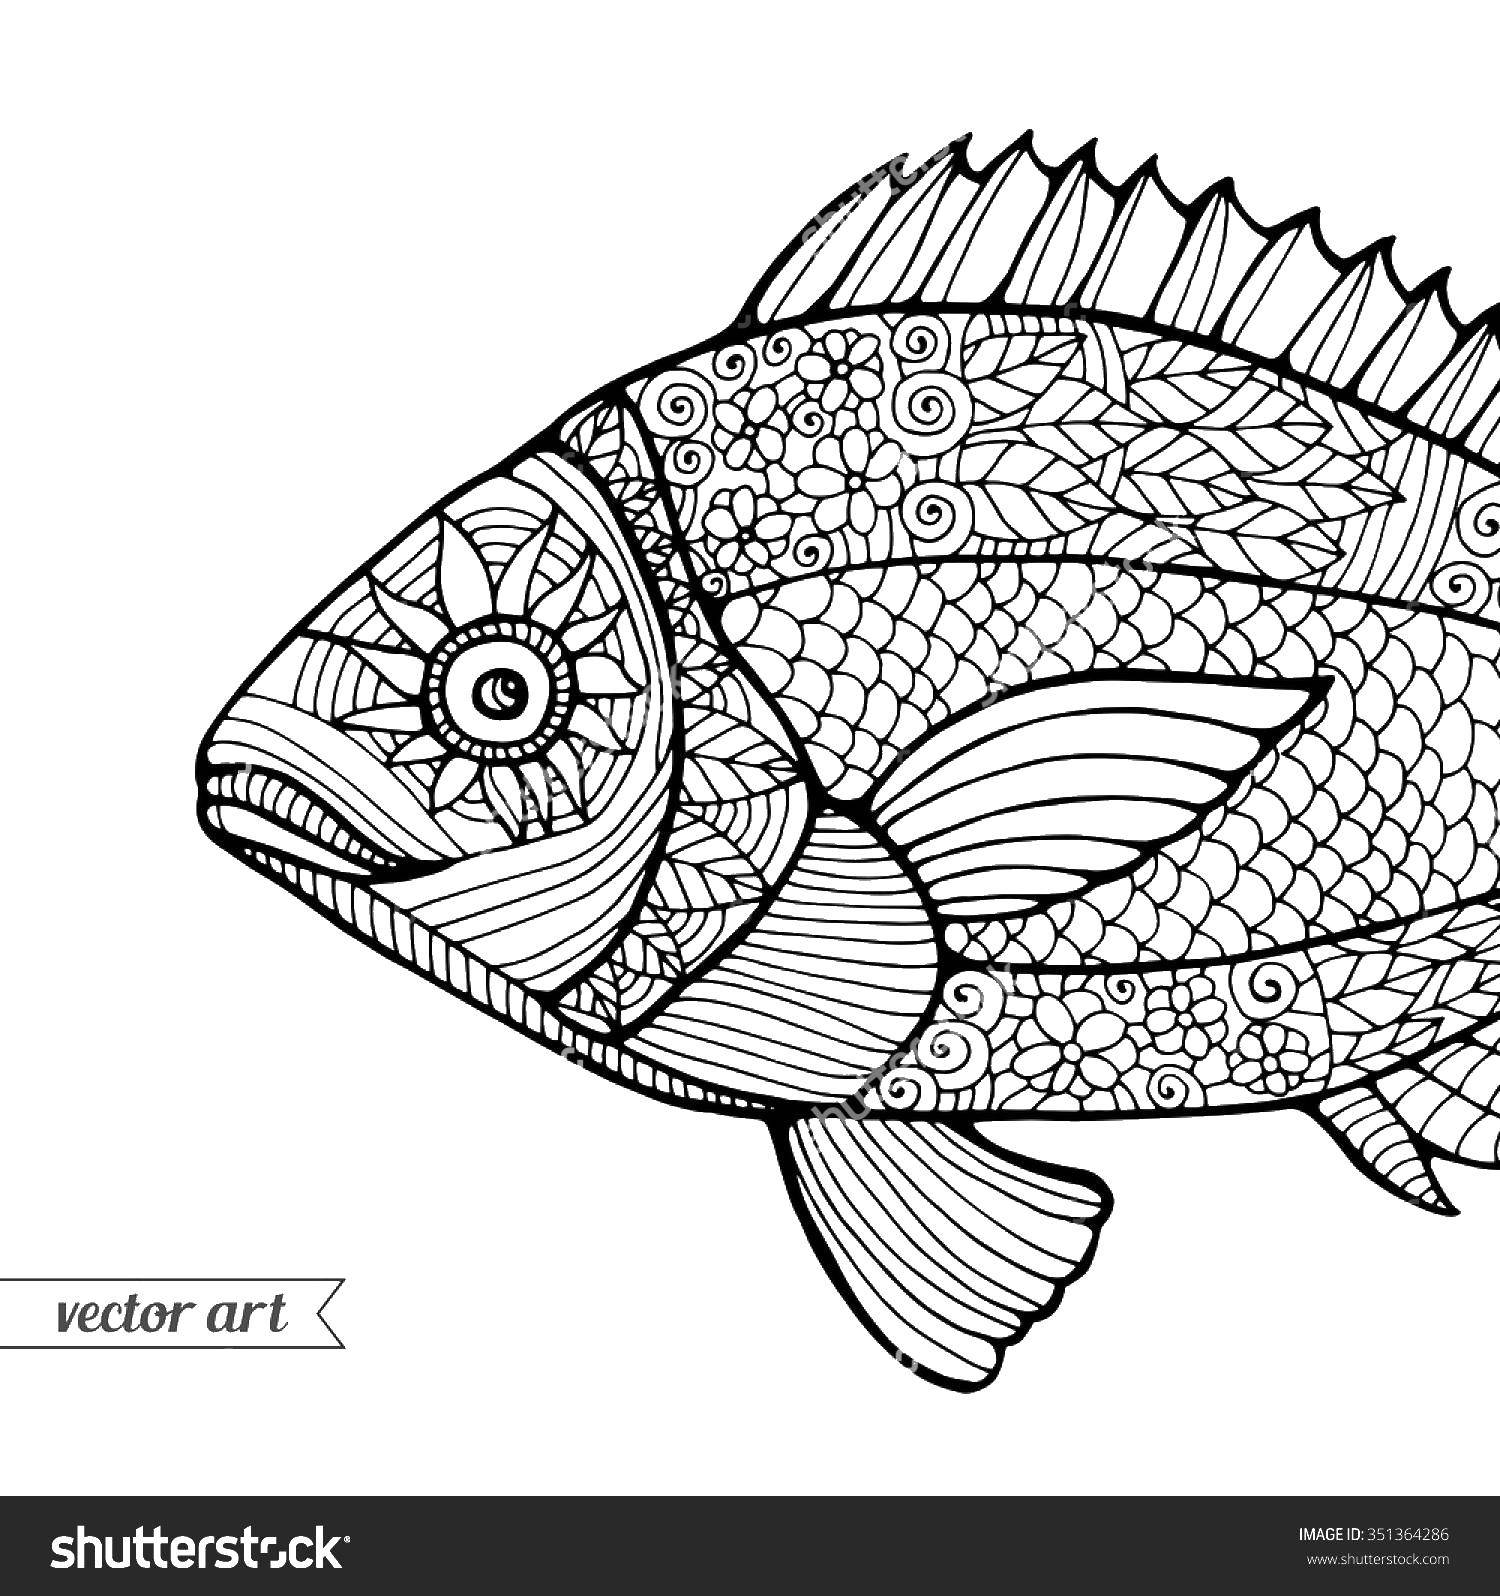 Coloring Fish patterns. Category patterns. Tags:  patterns, fish.